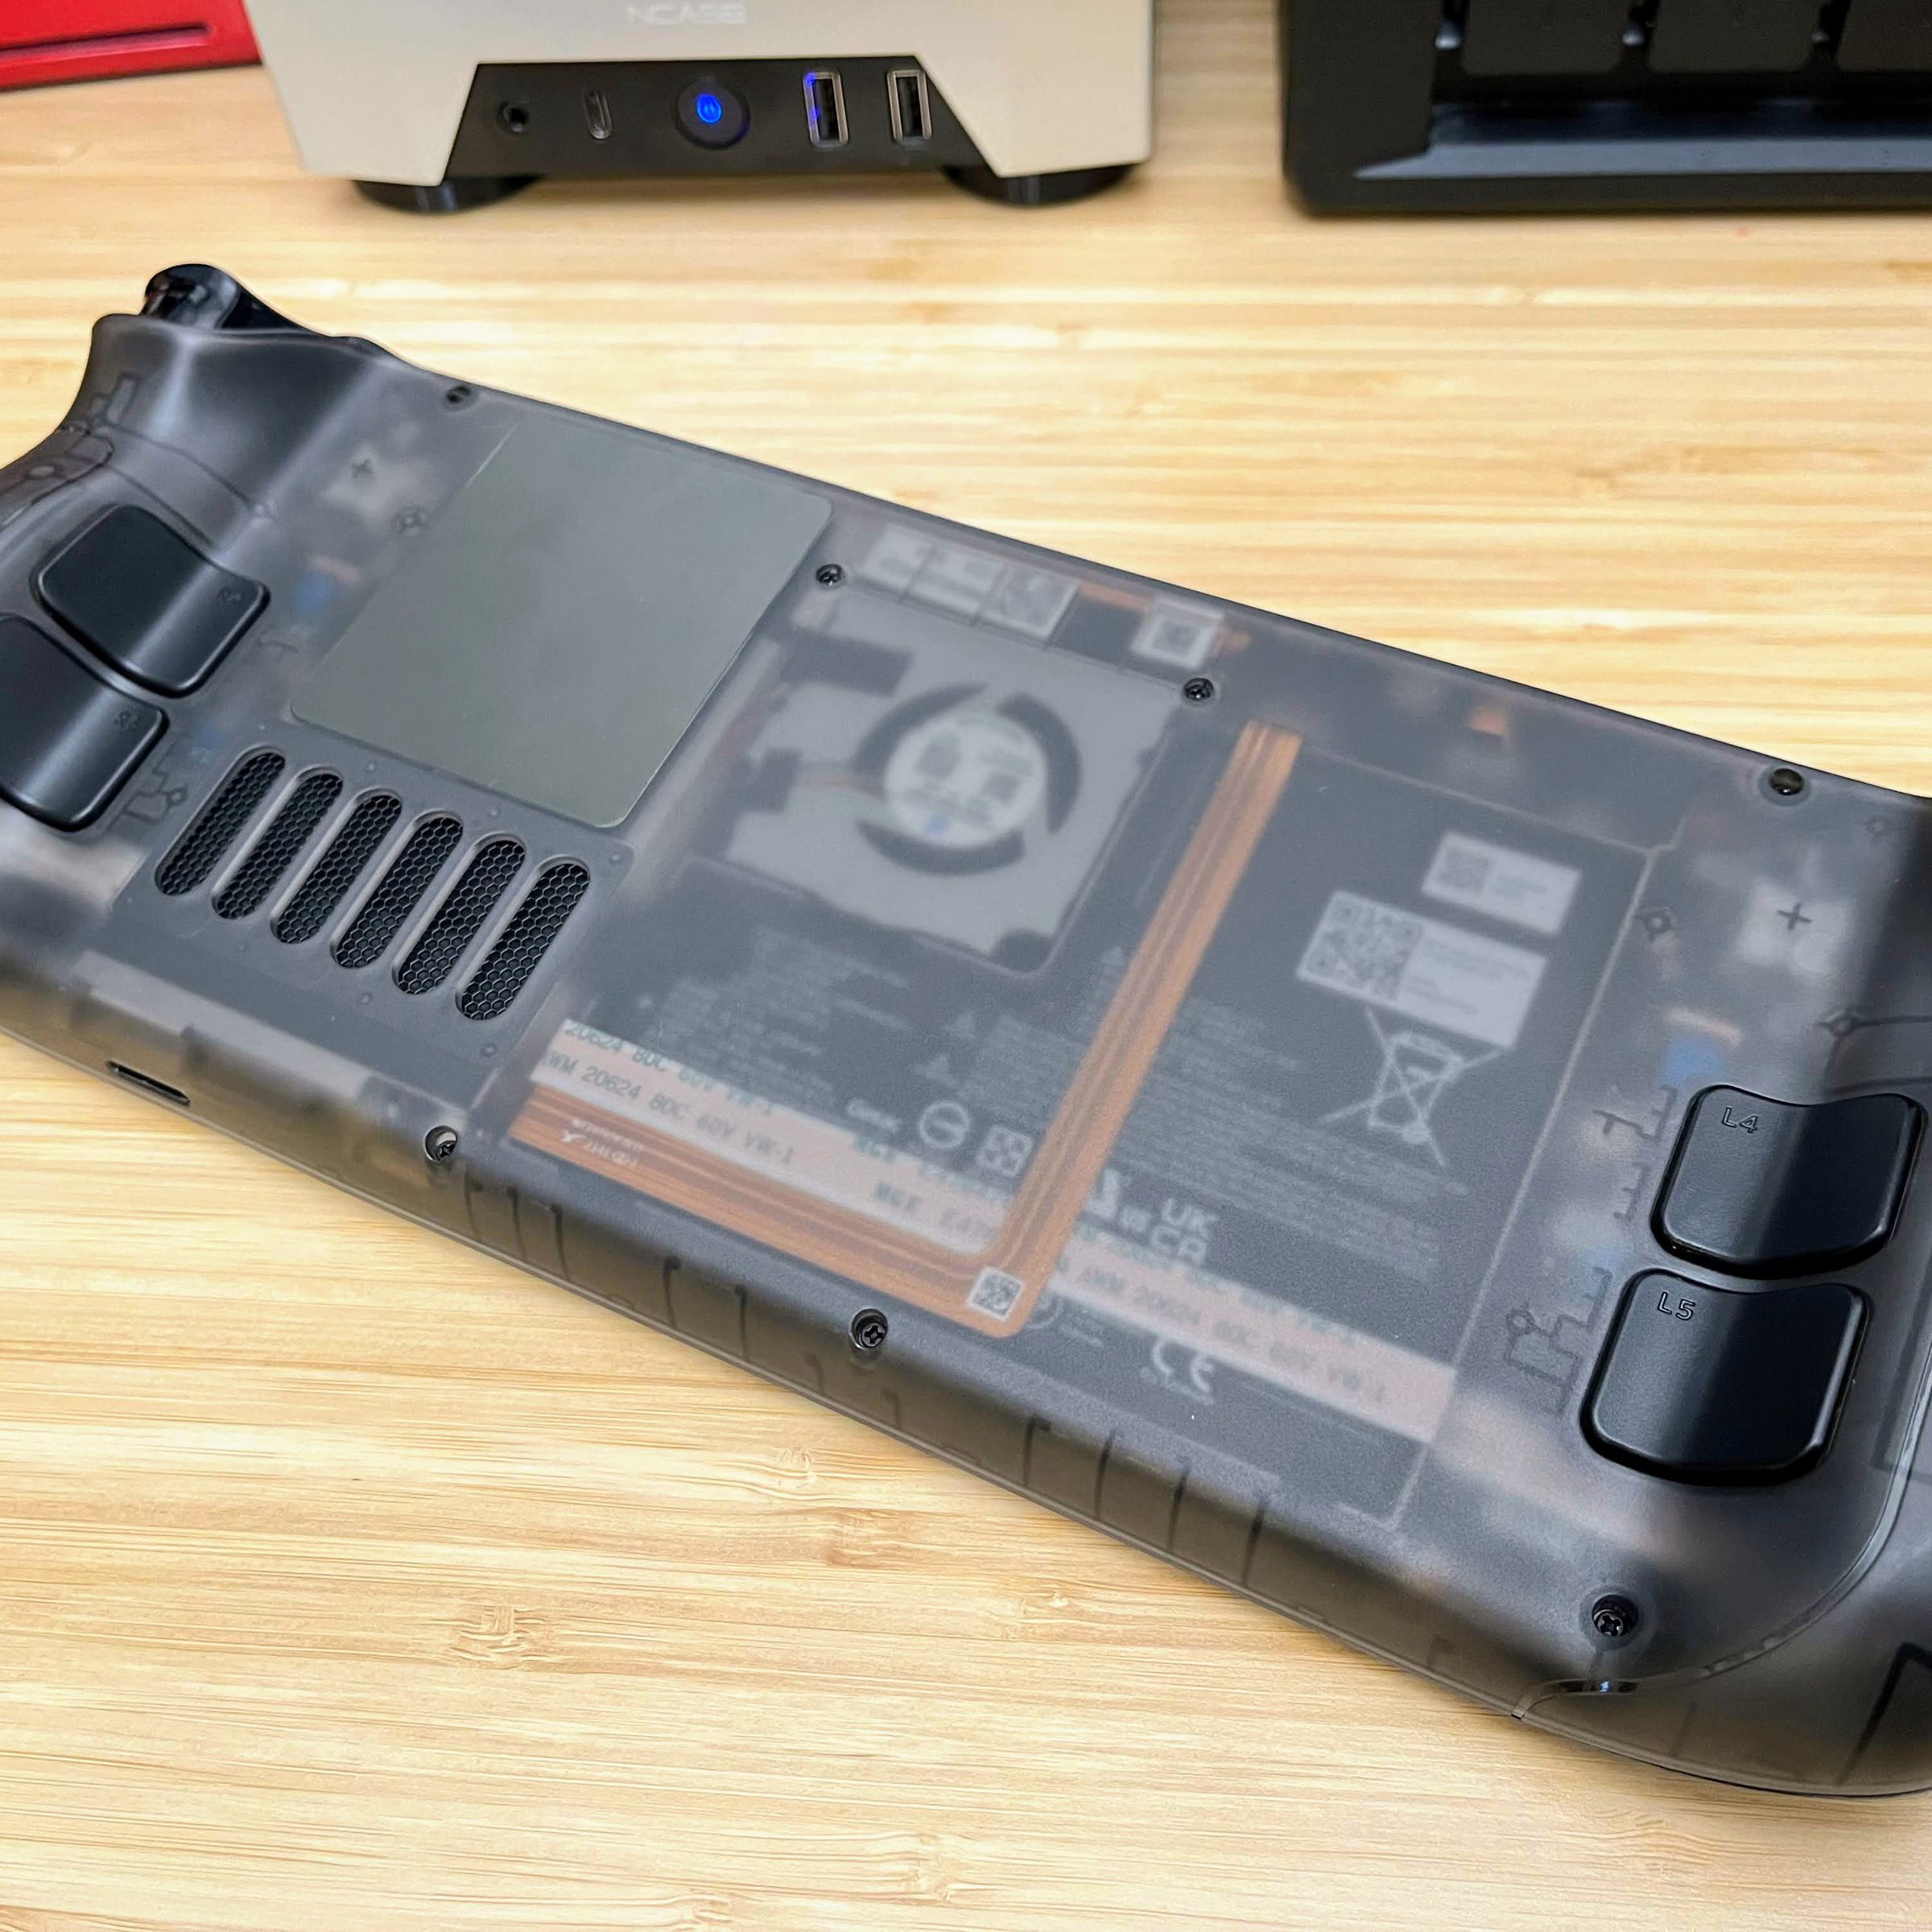 You can see the Steam Deck’s battery and fan through this transparent rear casing. 